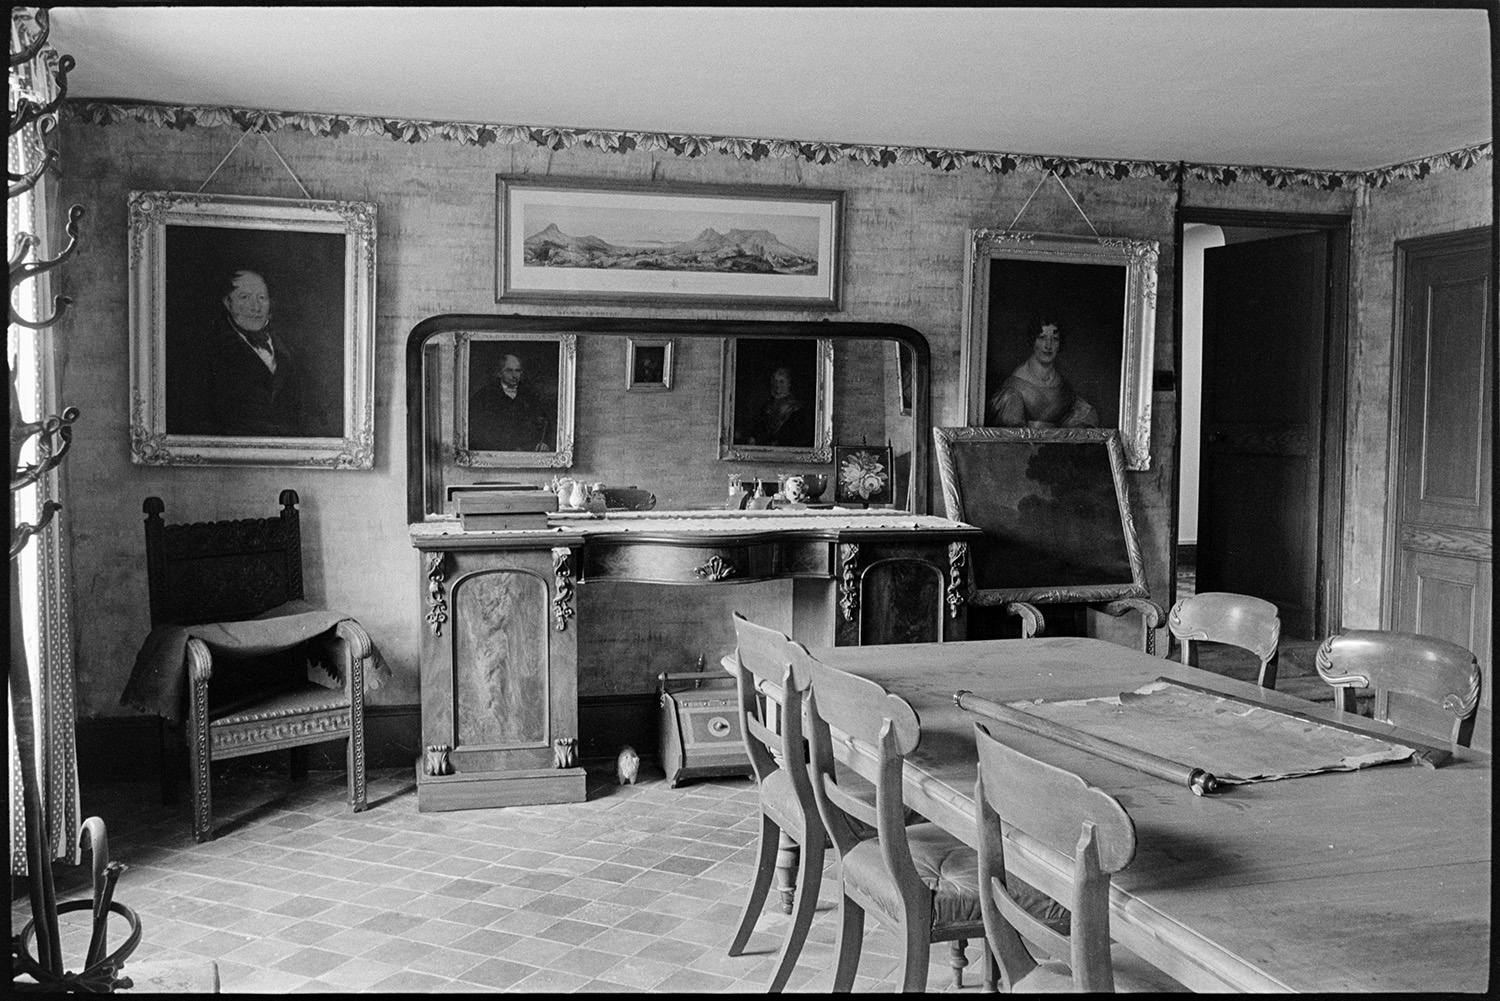 Dining room of large farmhouse. Furniture, table, chairs, mirror on sideboard. 
[The dining room at Narracott, South Molton with a large table, chairs, sideboard with mirror, a carved chair and pictures hung on the wall. An unrolled map is visible on the table.]